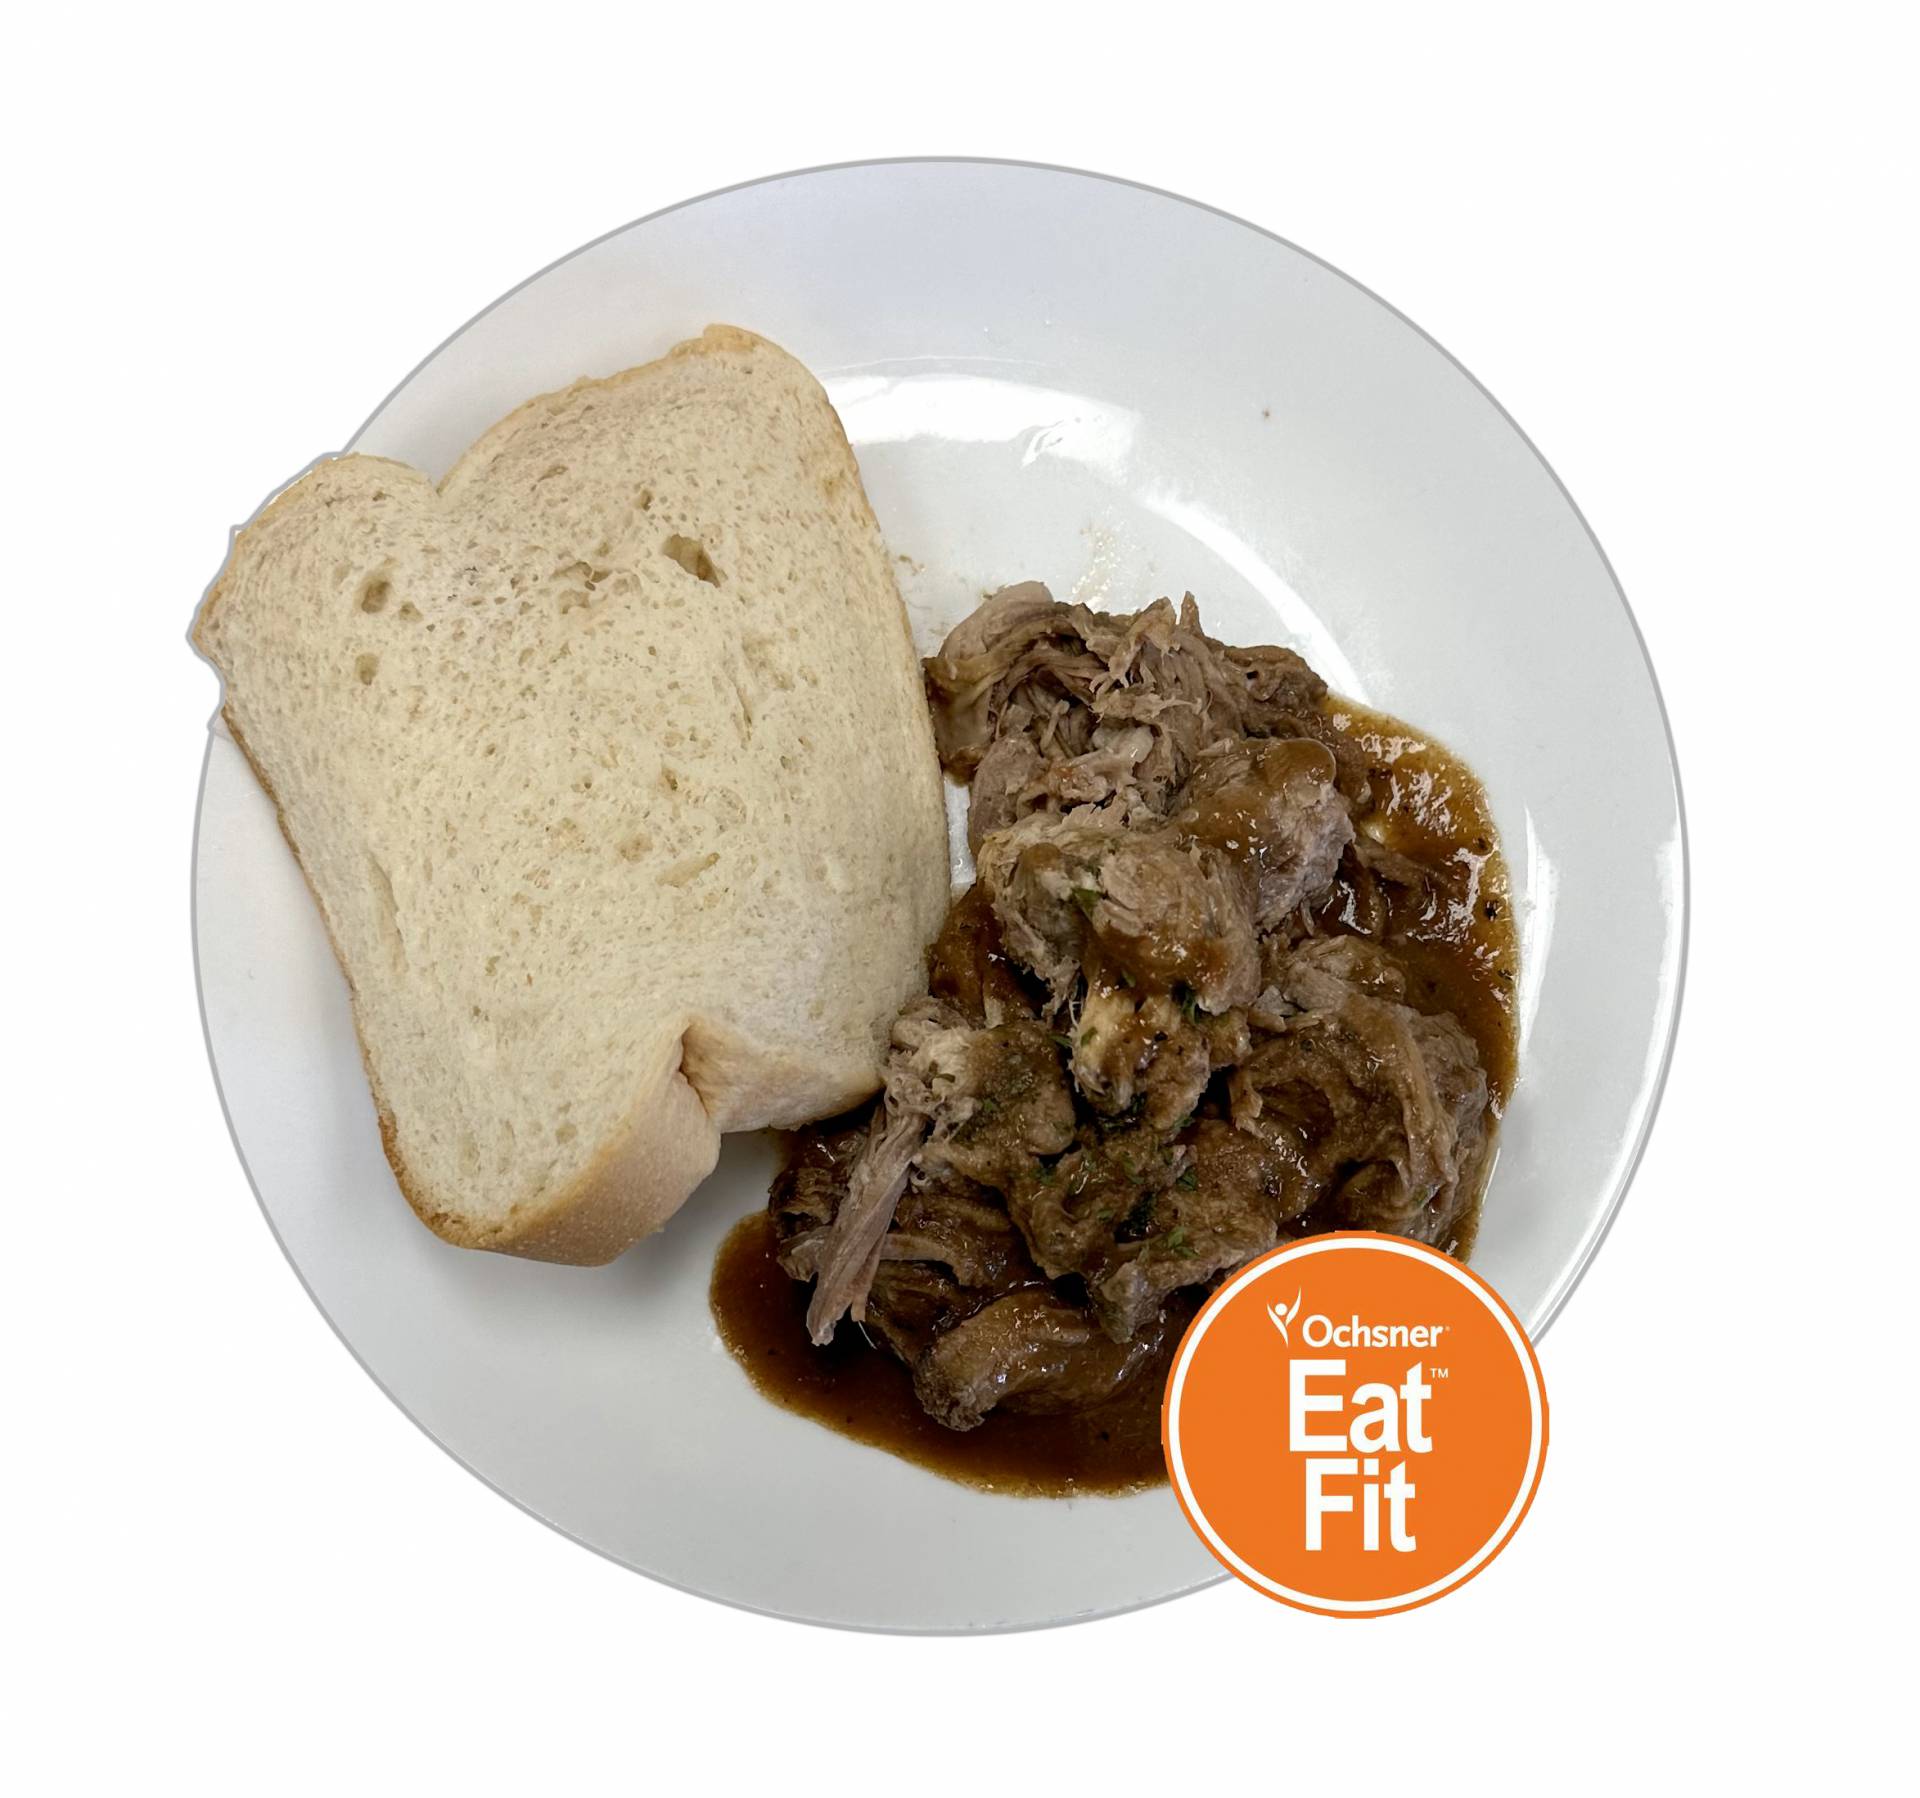 Roast Beef and Gravy Sandwich on Sliced Bread - Low Carb